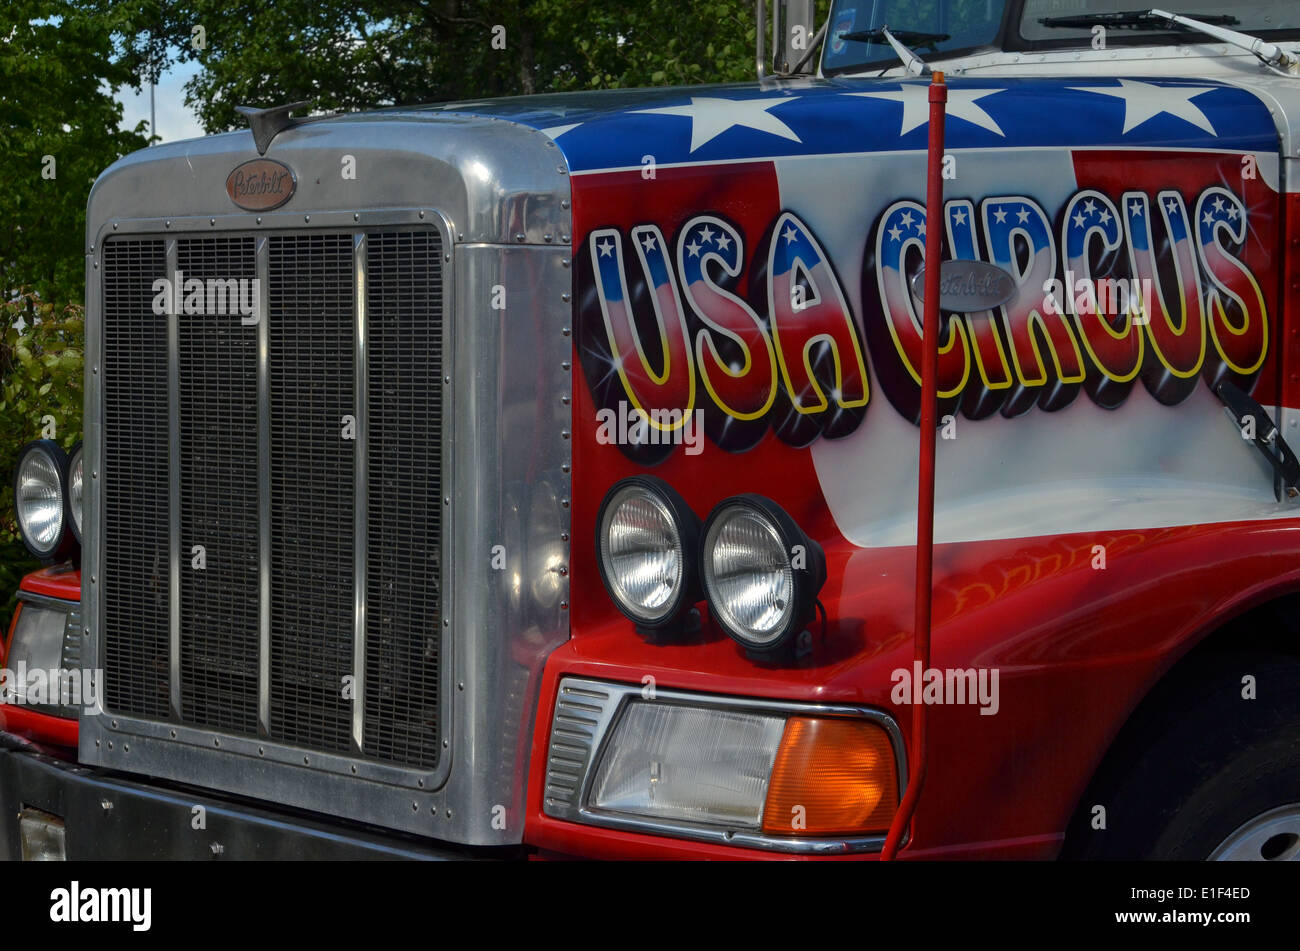 The circus is in town! Big American trucks, brightly painted Stock Photo